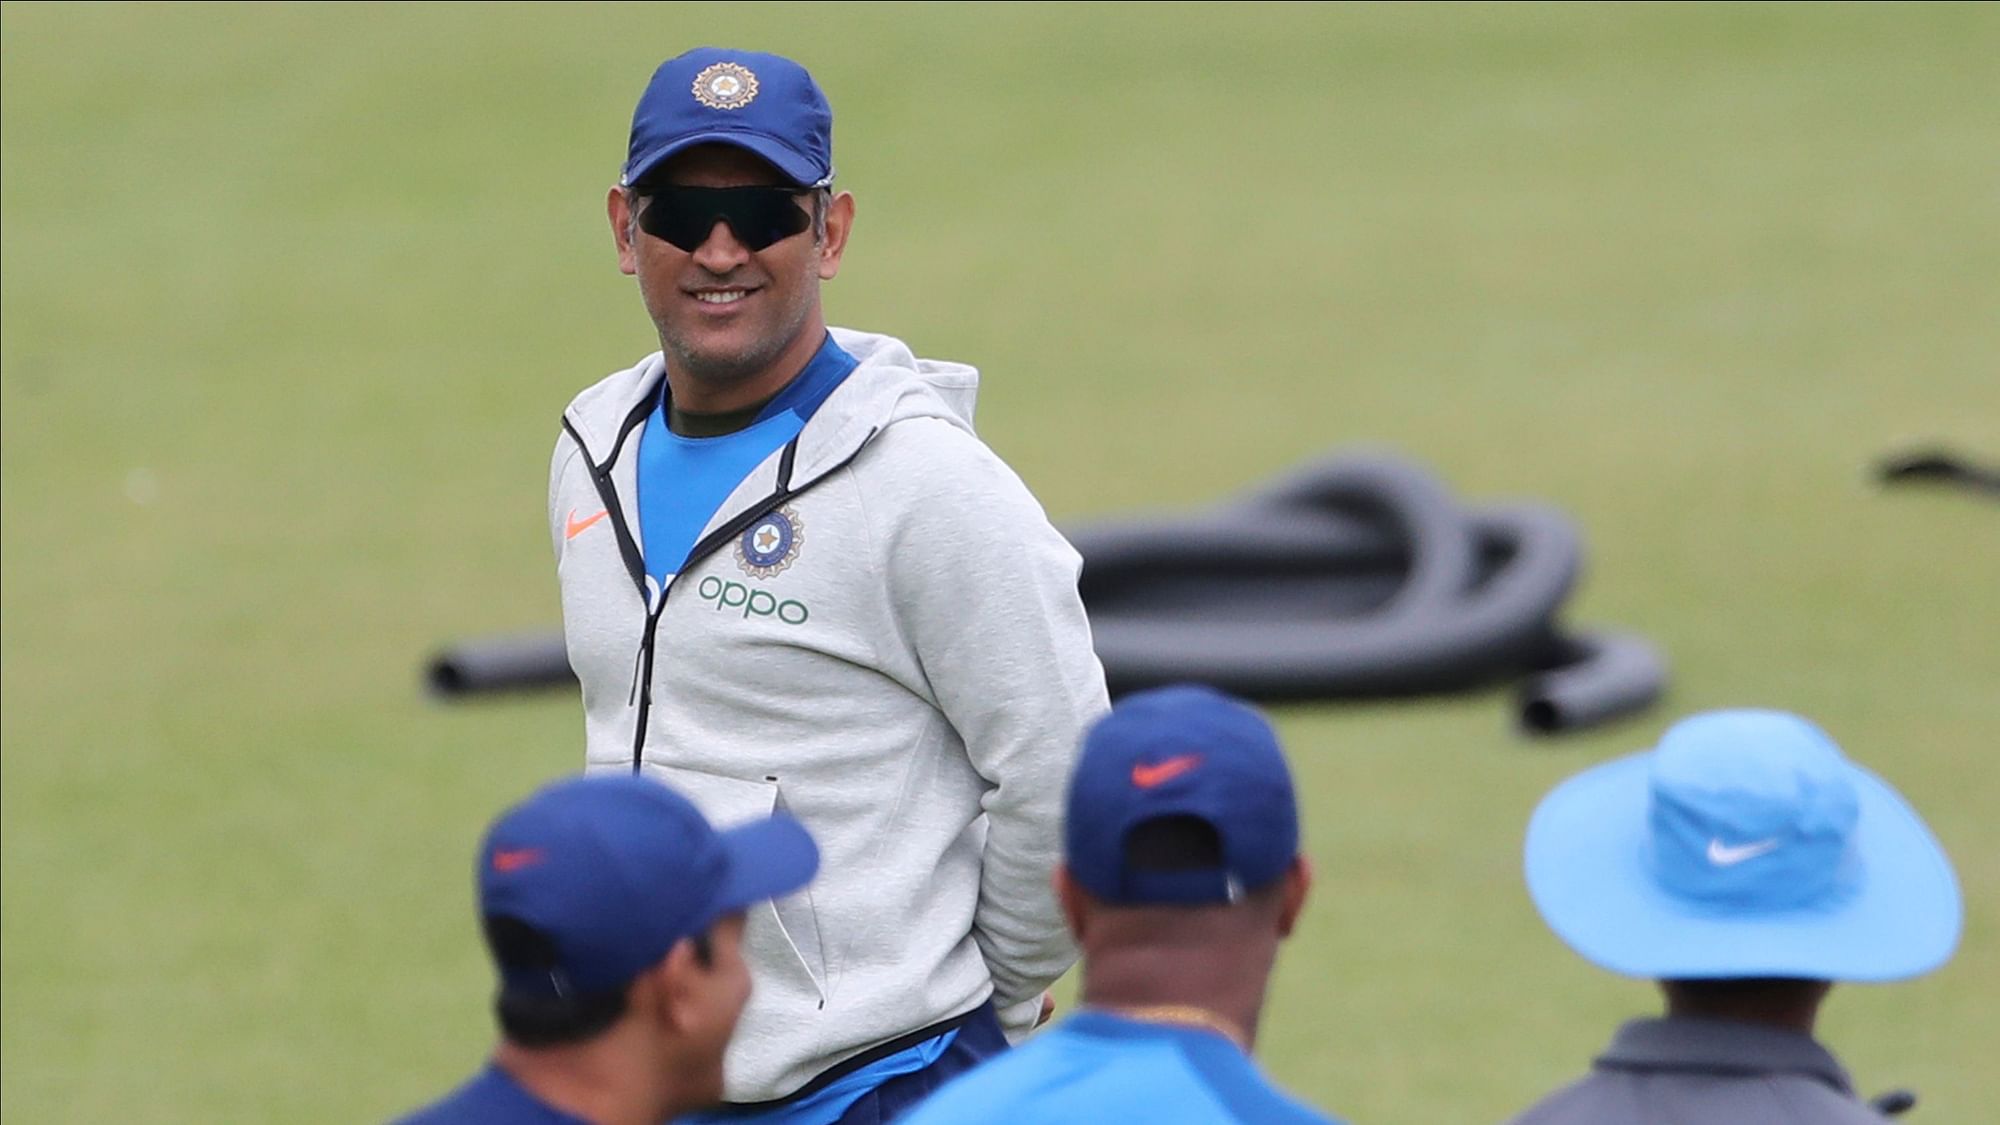 Former India captain Mahendra Singh Dhoni made himself “unavailable” for the Indian team’s tour of West Indies.